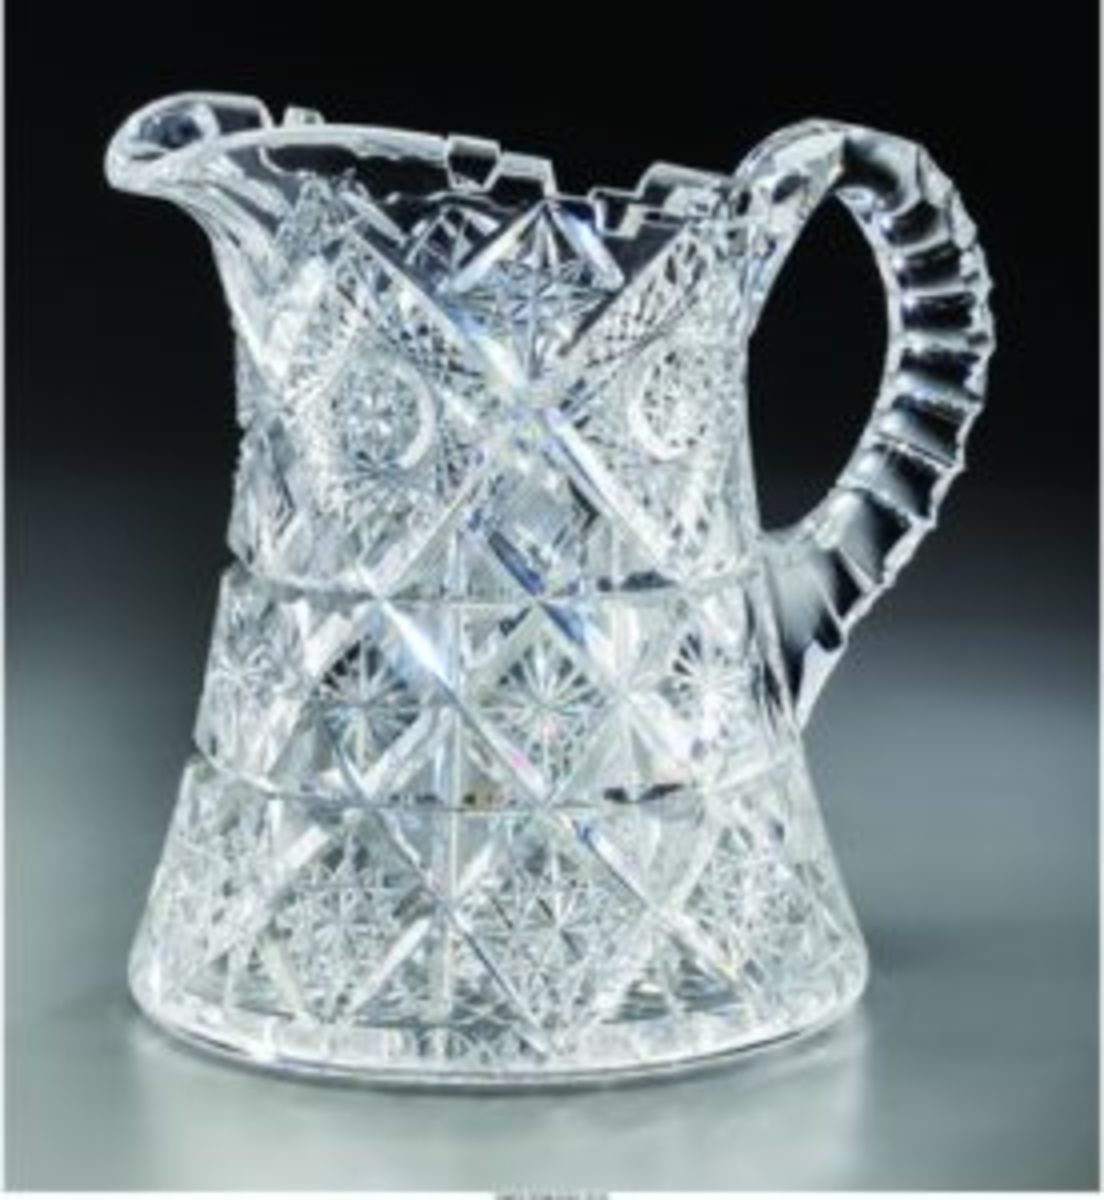 ABCG crystal pitcher